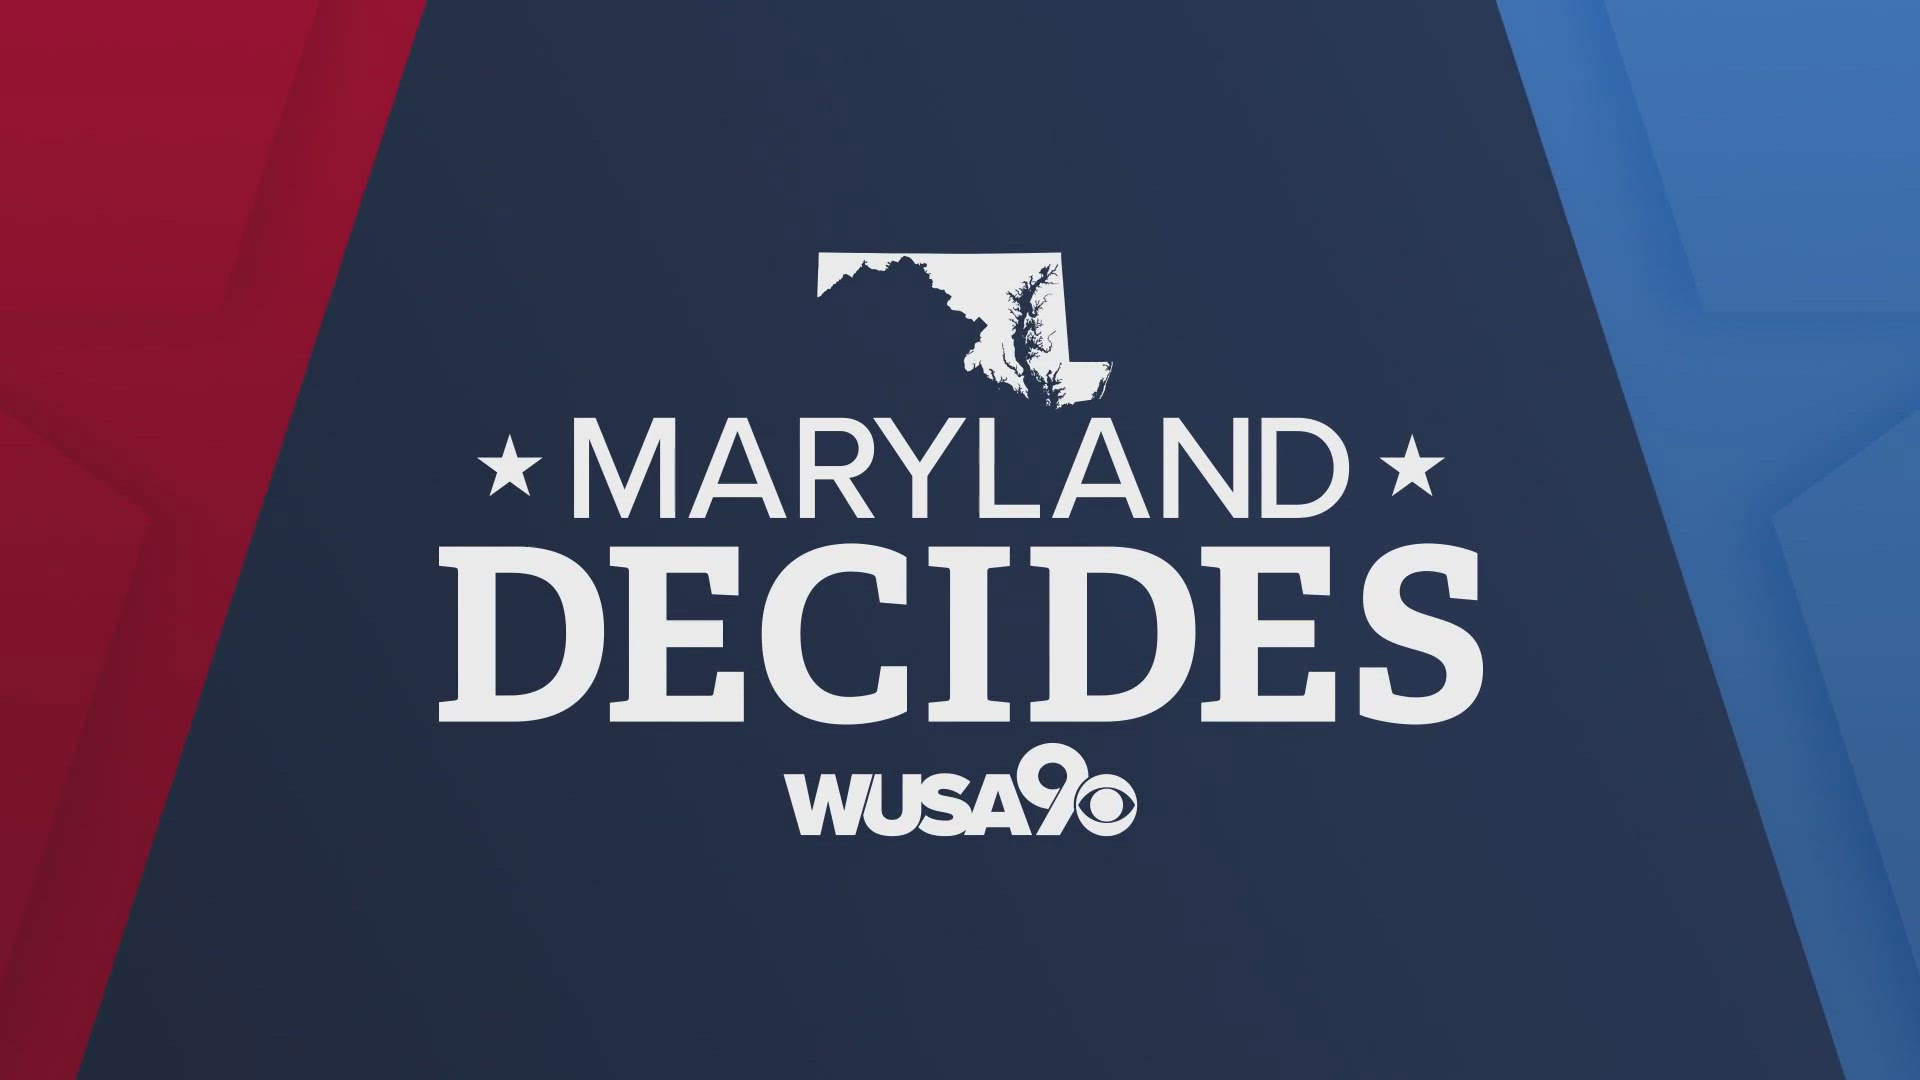 Join us as WUSA9 will host a debate with Maryland's Senate candidates prior the elections.